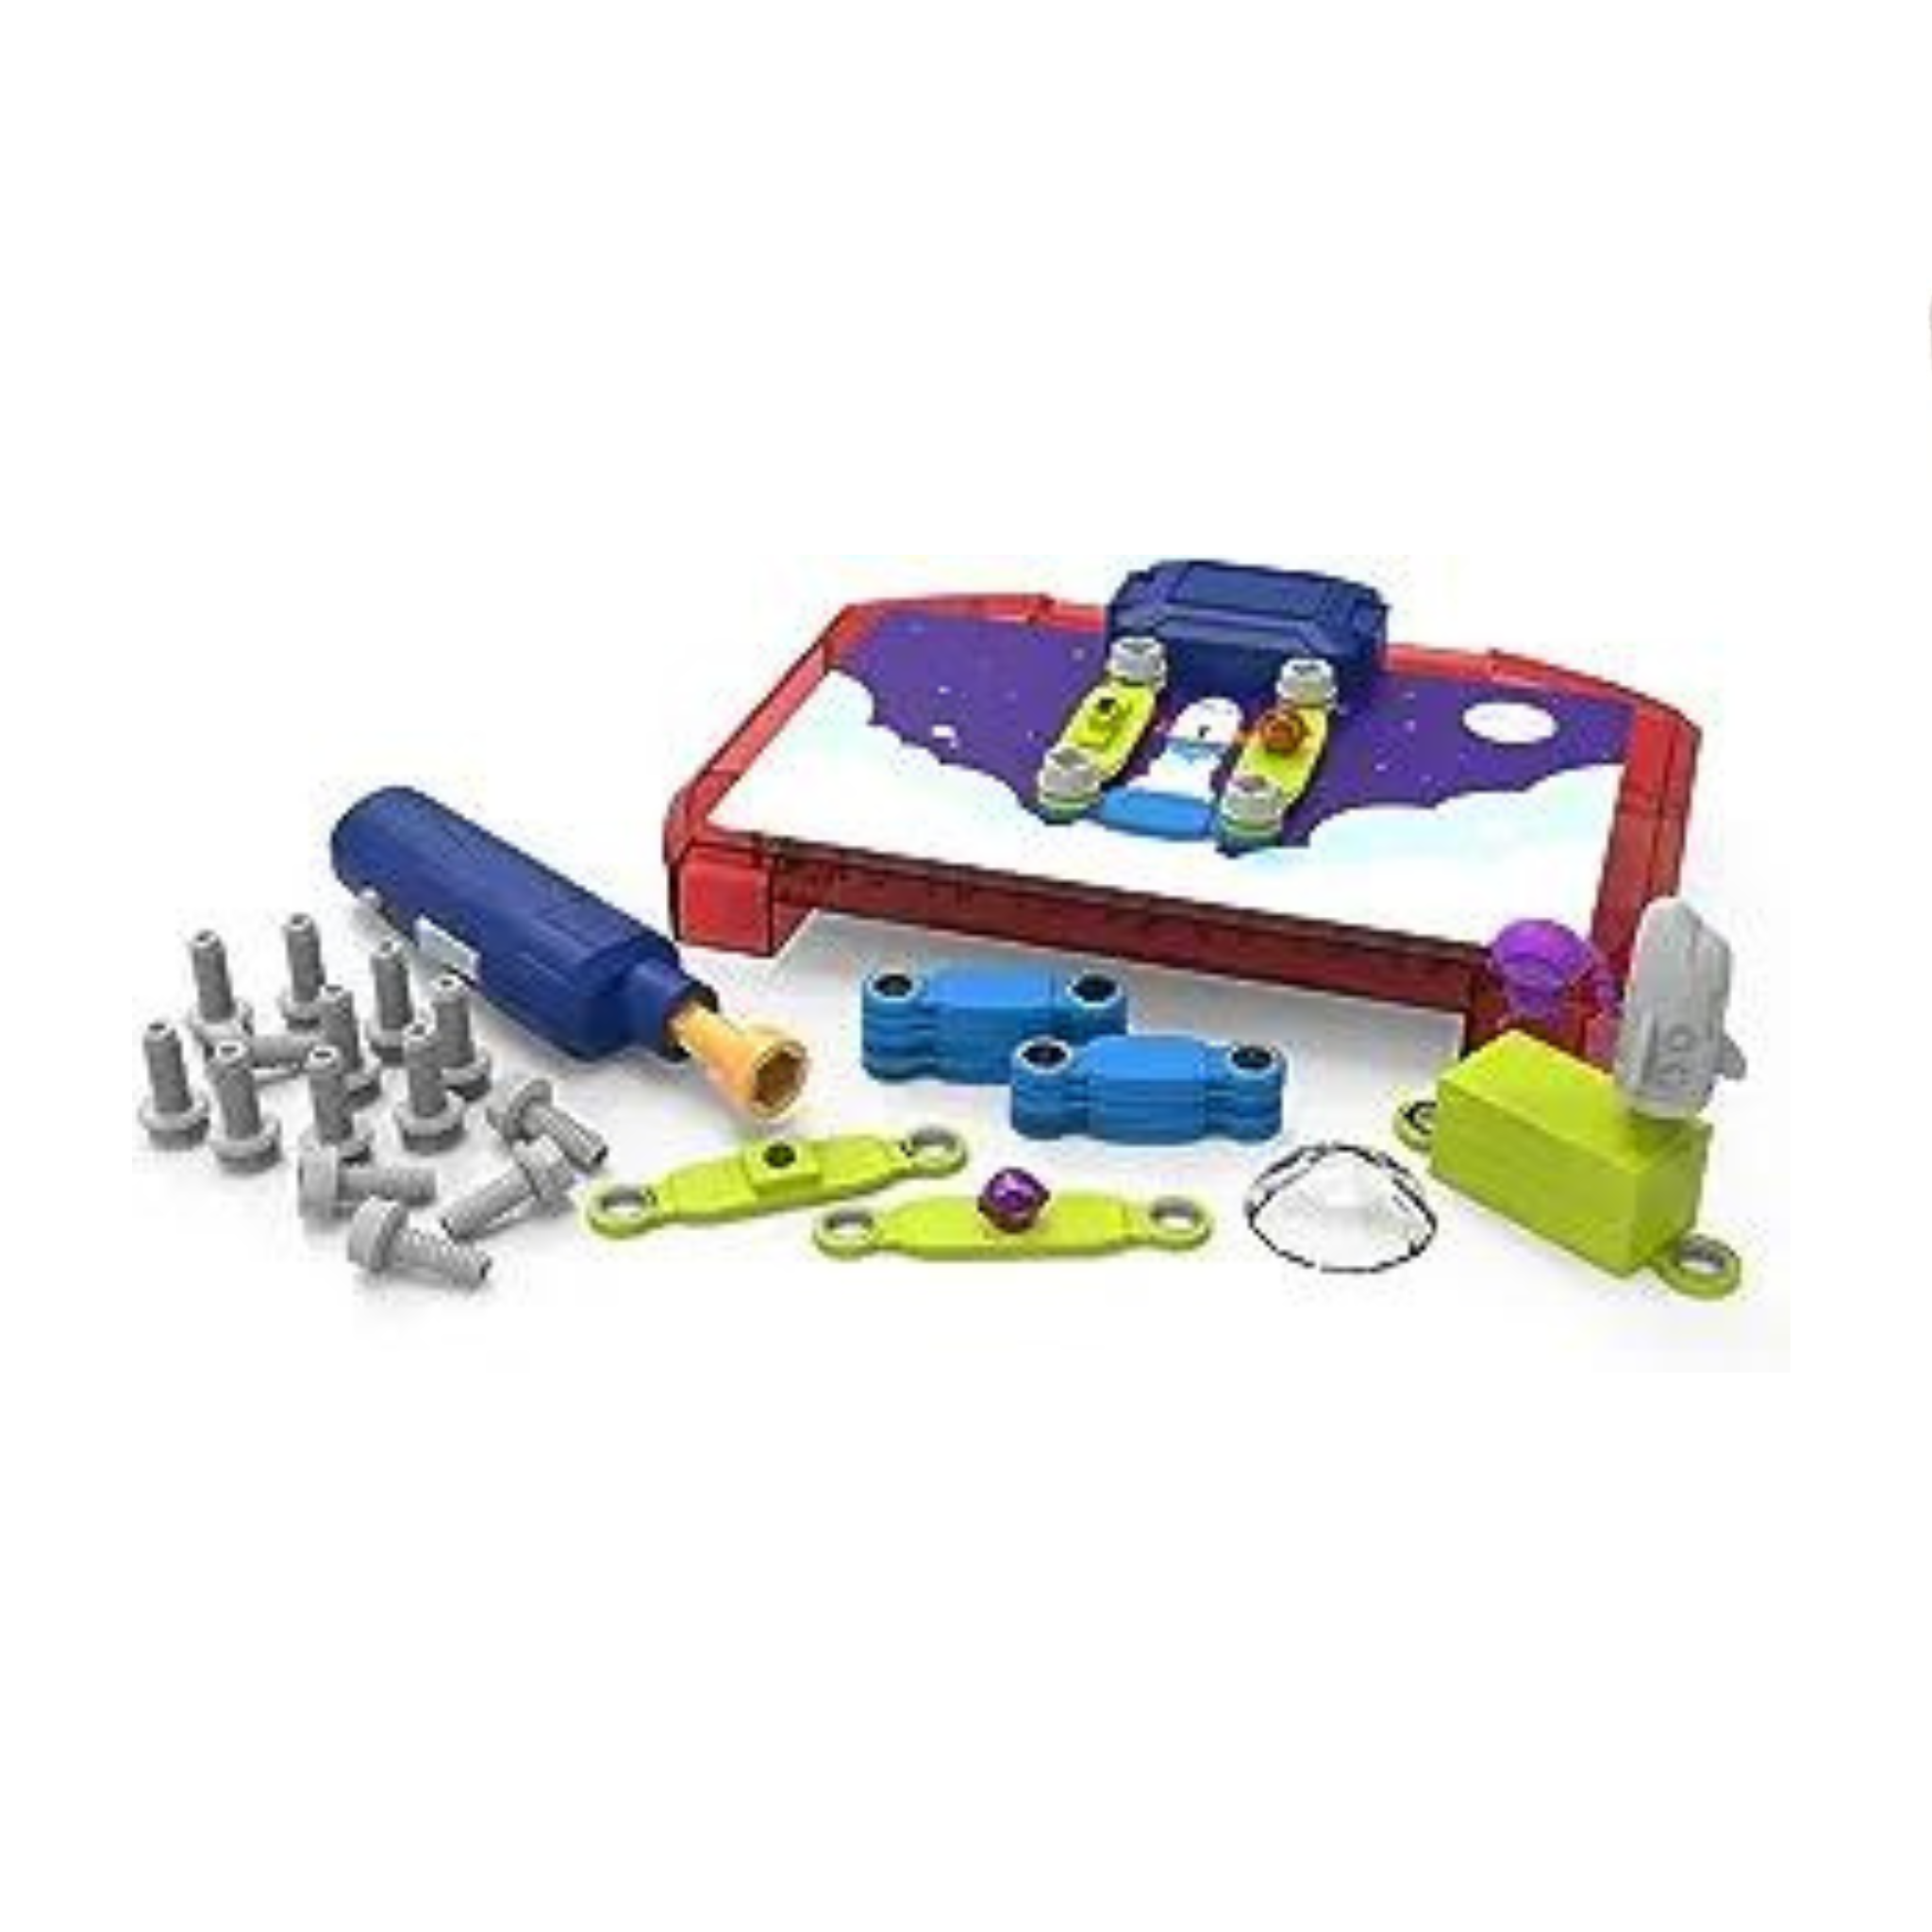 52 Pcs STEM Space Circuits Kit with Power Drill & Challenges